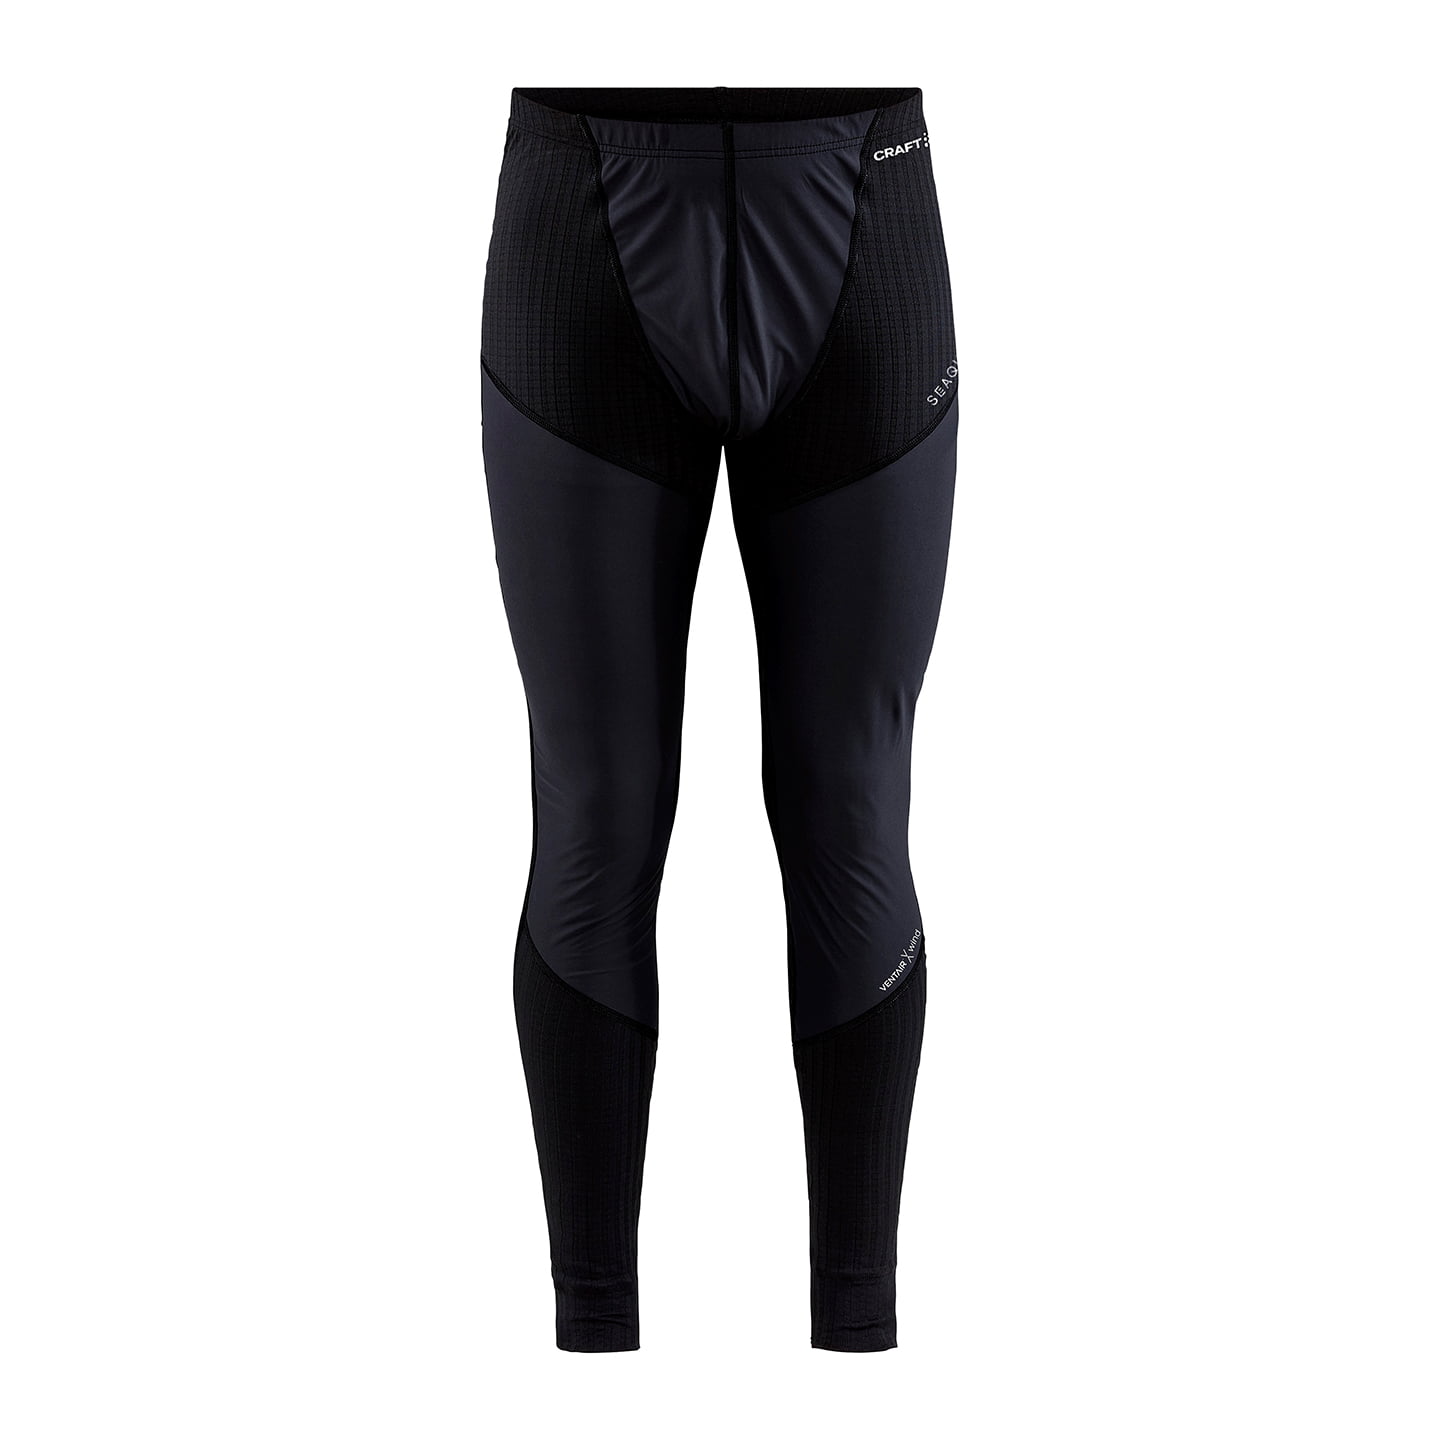 CRAFT Active Extreme X Warmers w/o Pad Cycling Briefs w/o Pad, for men, size S, Briefs, Bike gear